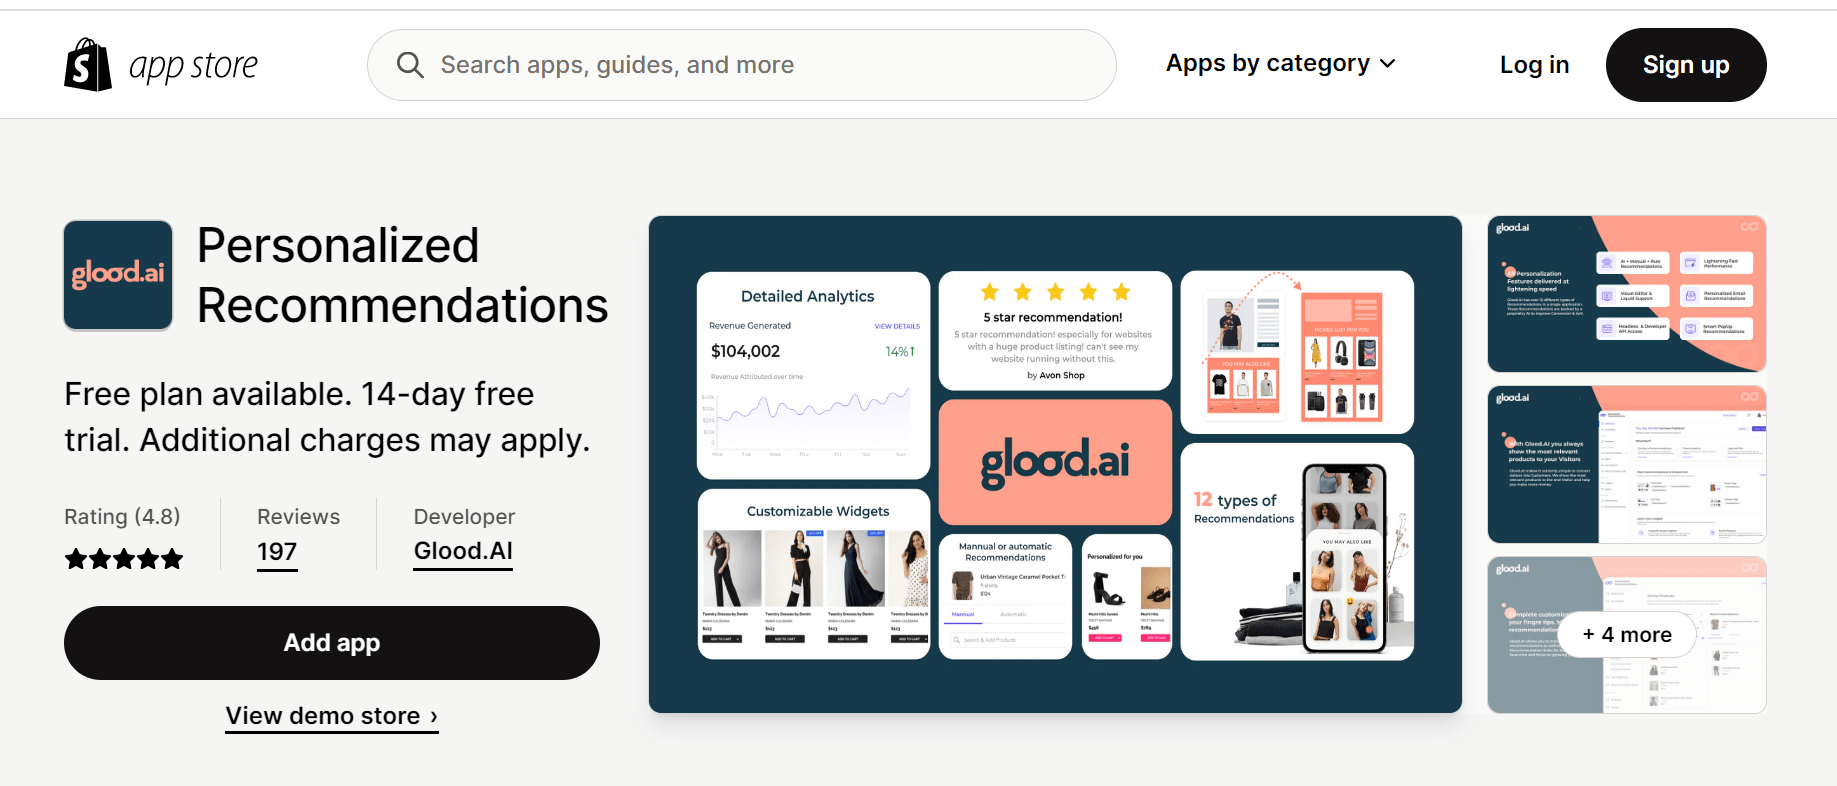 Personalized recommendations